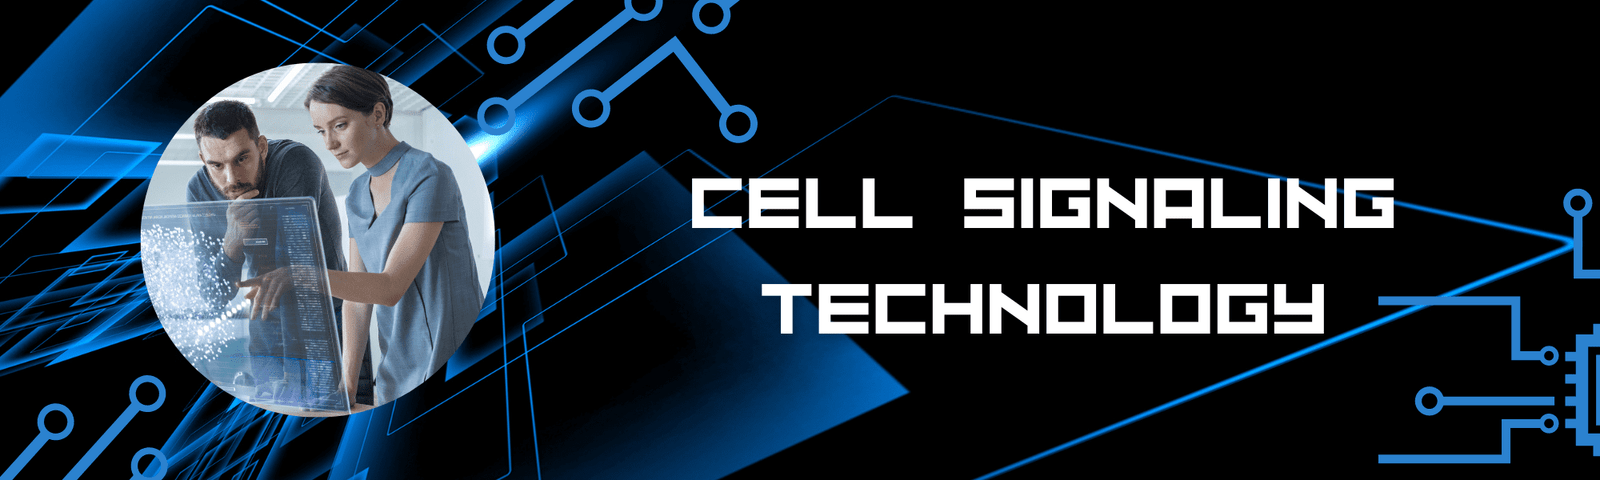 Cell Signaling Technology is a private company that provides various biological products and services to the world.